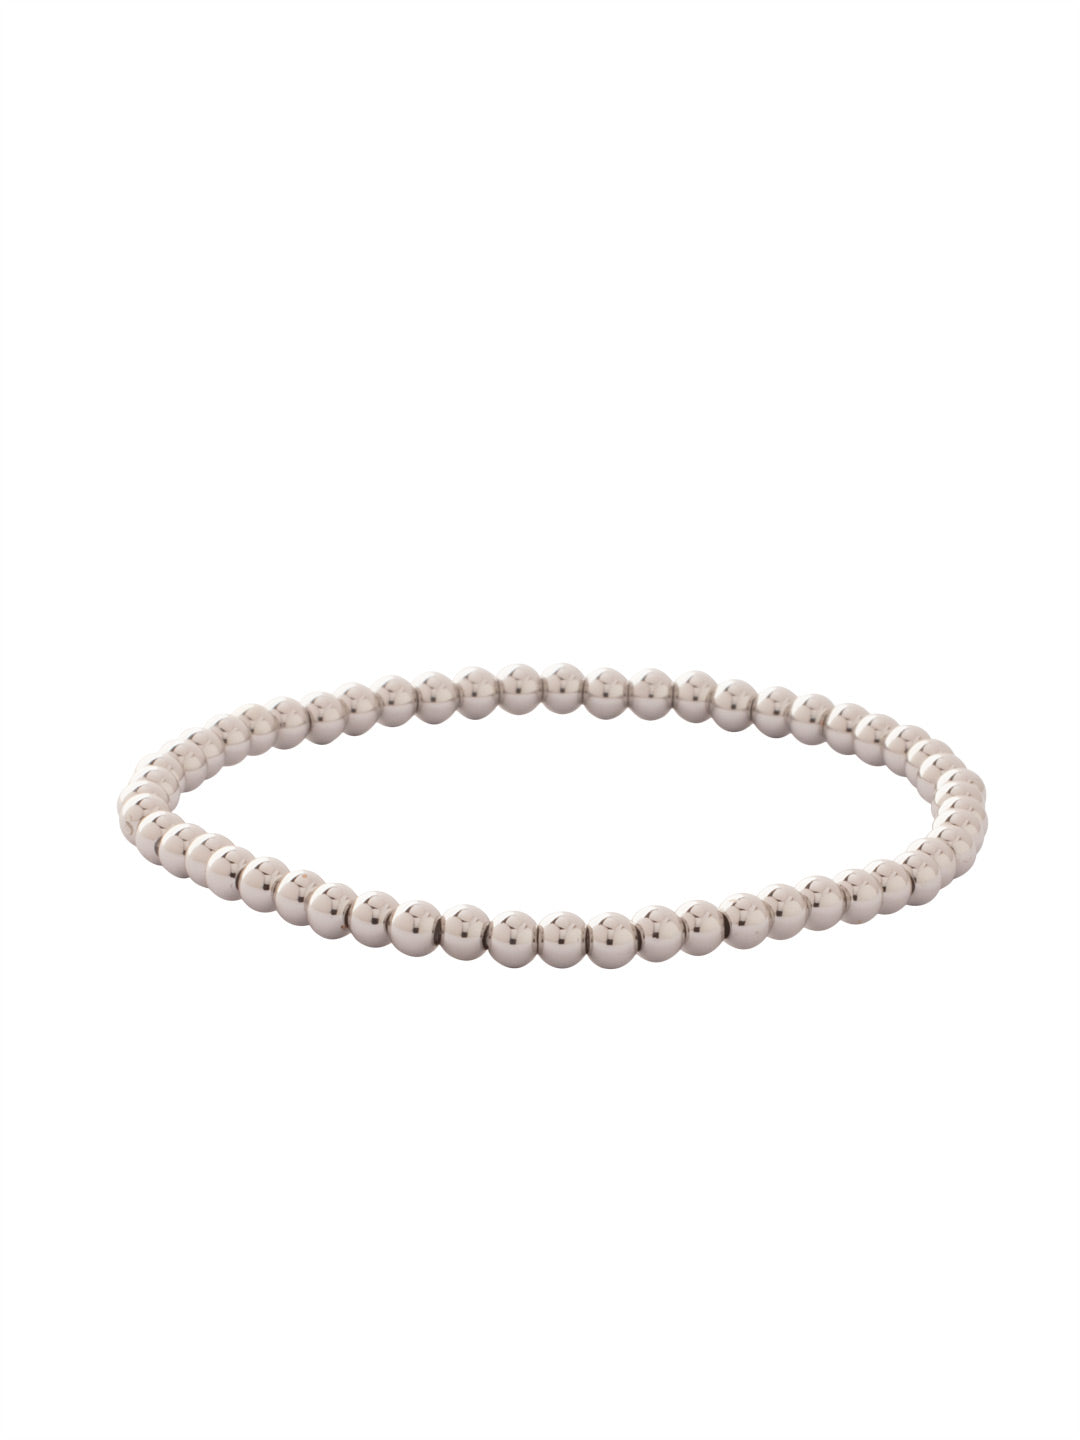 Mini Zola Stretch Bracelet - BFN20PDMTL - <p>A mini take on a best-selling style, the Mini Zola Stretch Bracelet features repeating metal beads on a multi-layered stretchy jewelry filament, creating a durable and trendy piece. From Sorrelli's Bare Metallic collection in our Palladium finish.</p>